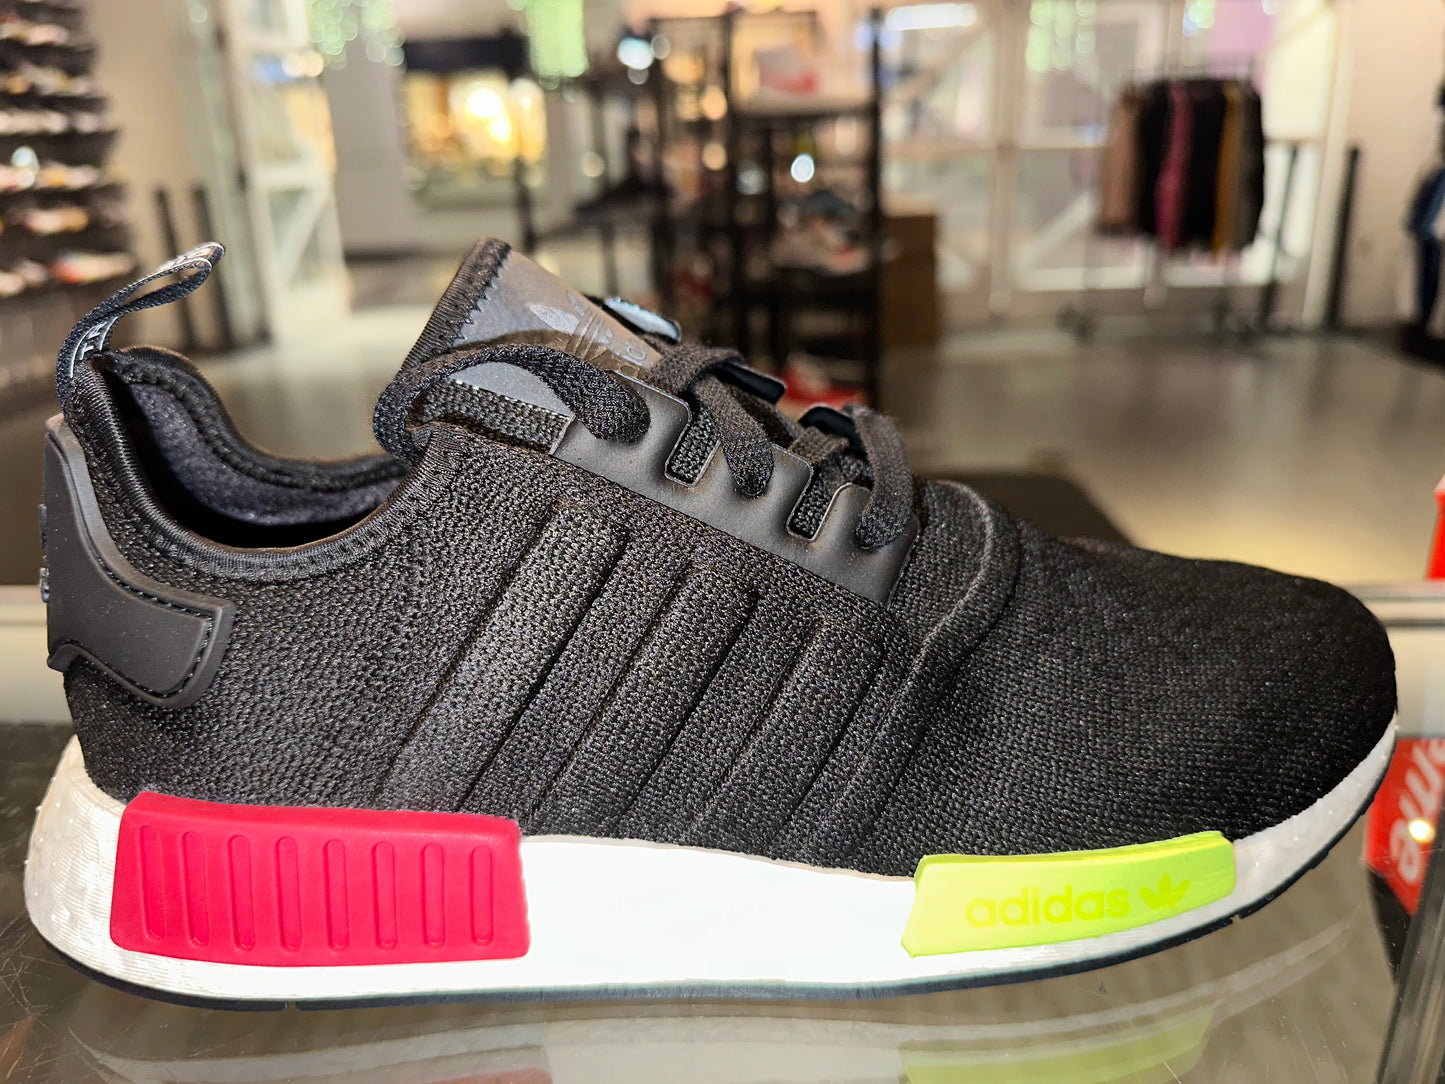 Size 10 Adidas NMD R1 “Black Energy Pink” Brand New (Mall)